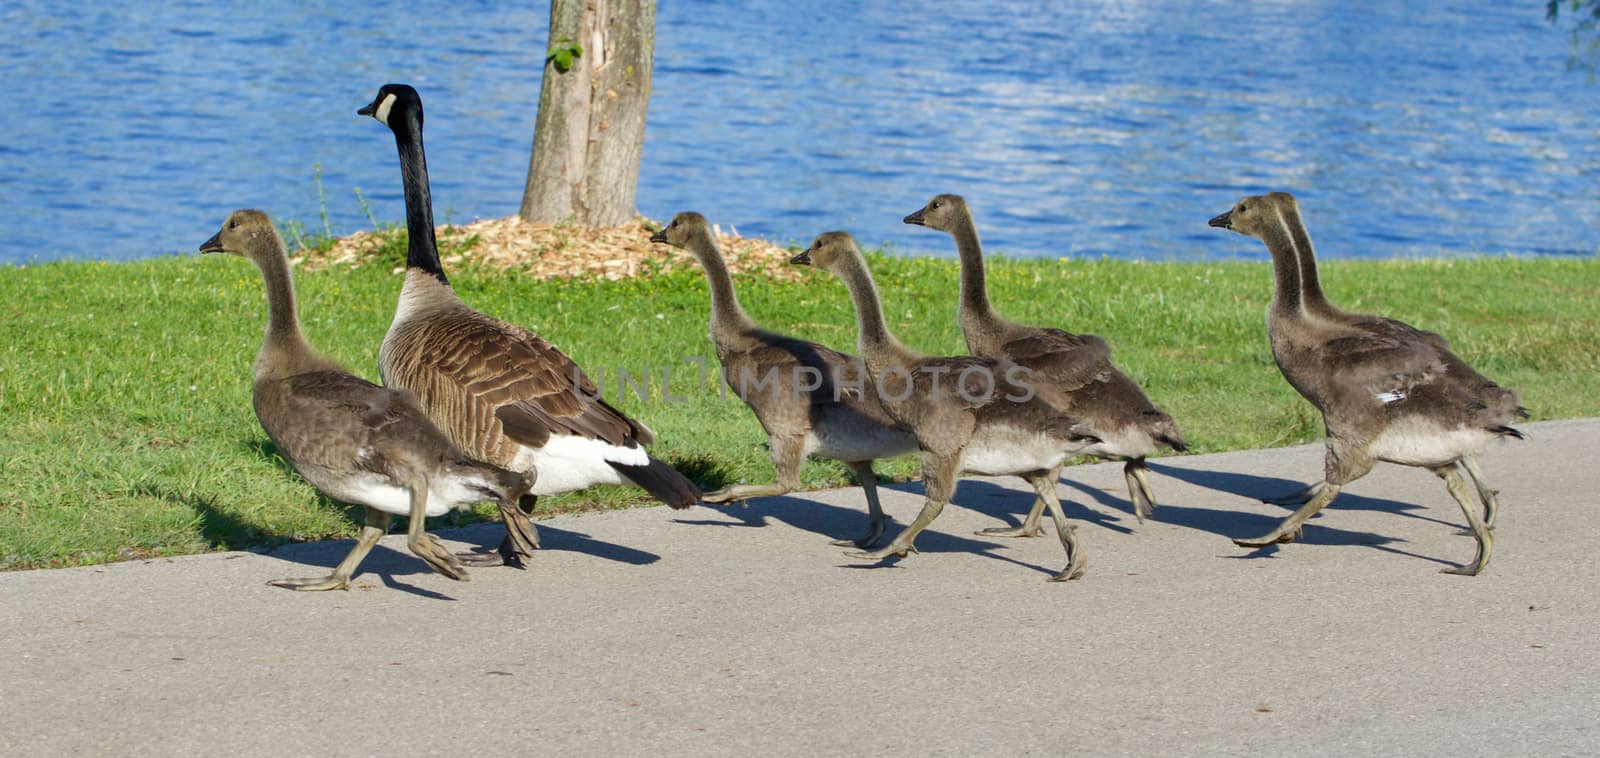 The cackling geese are running